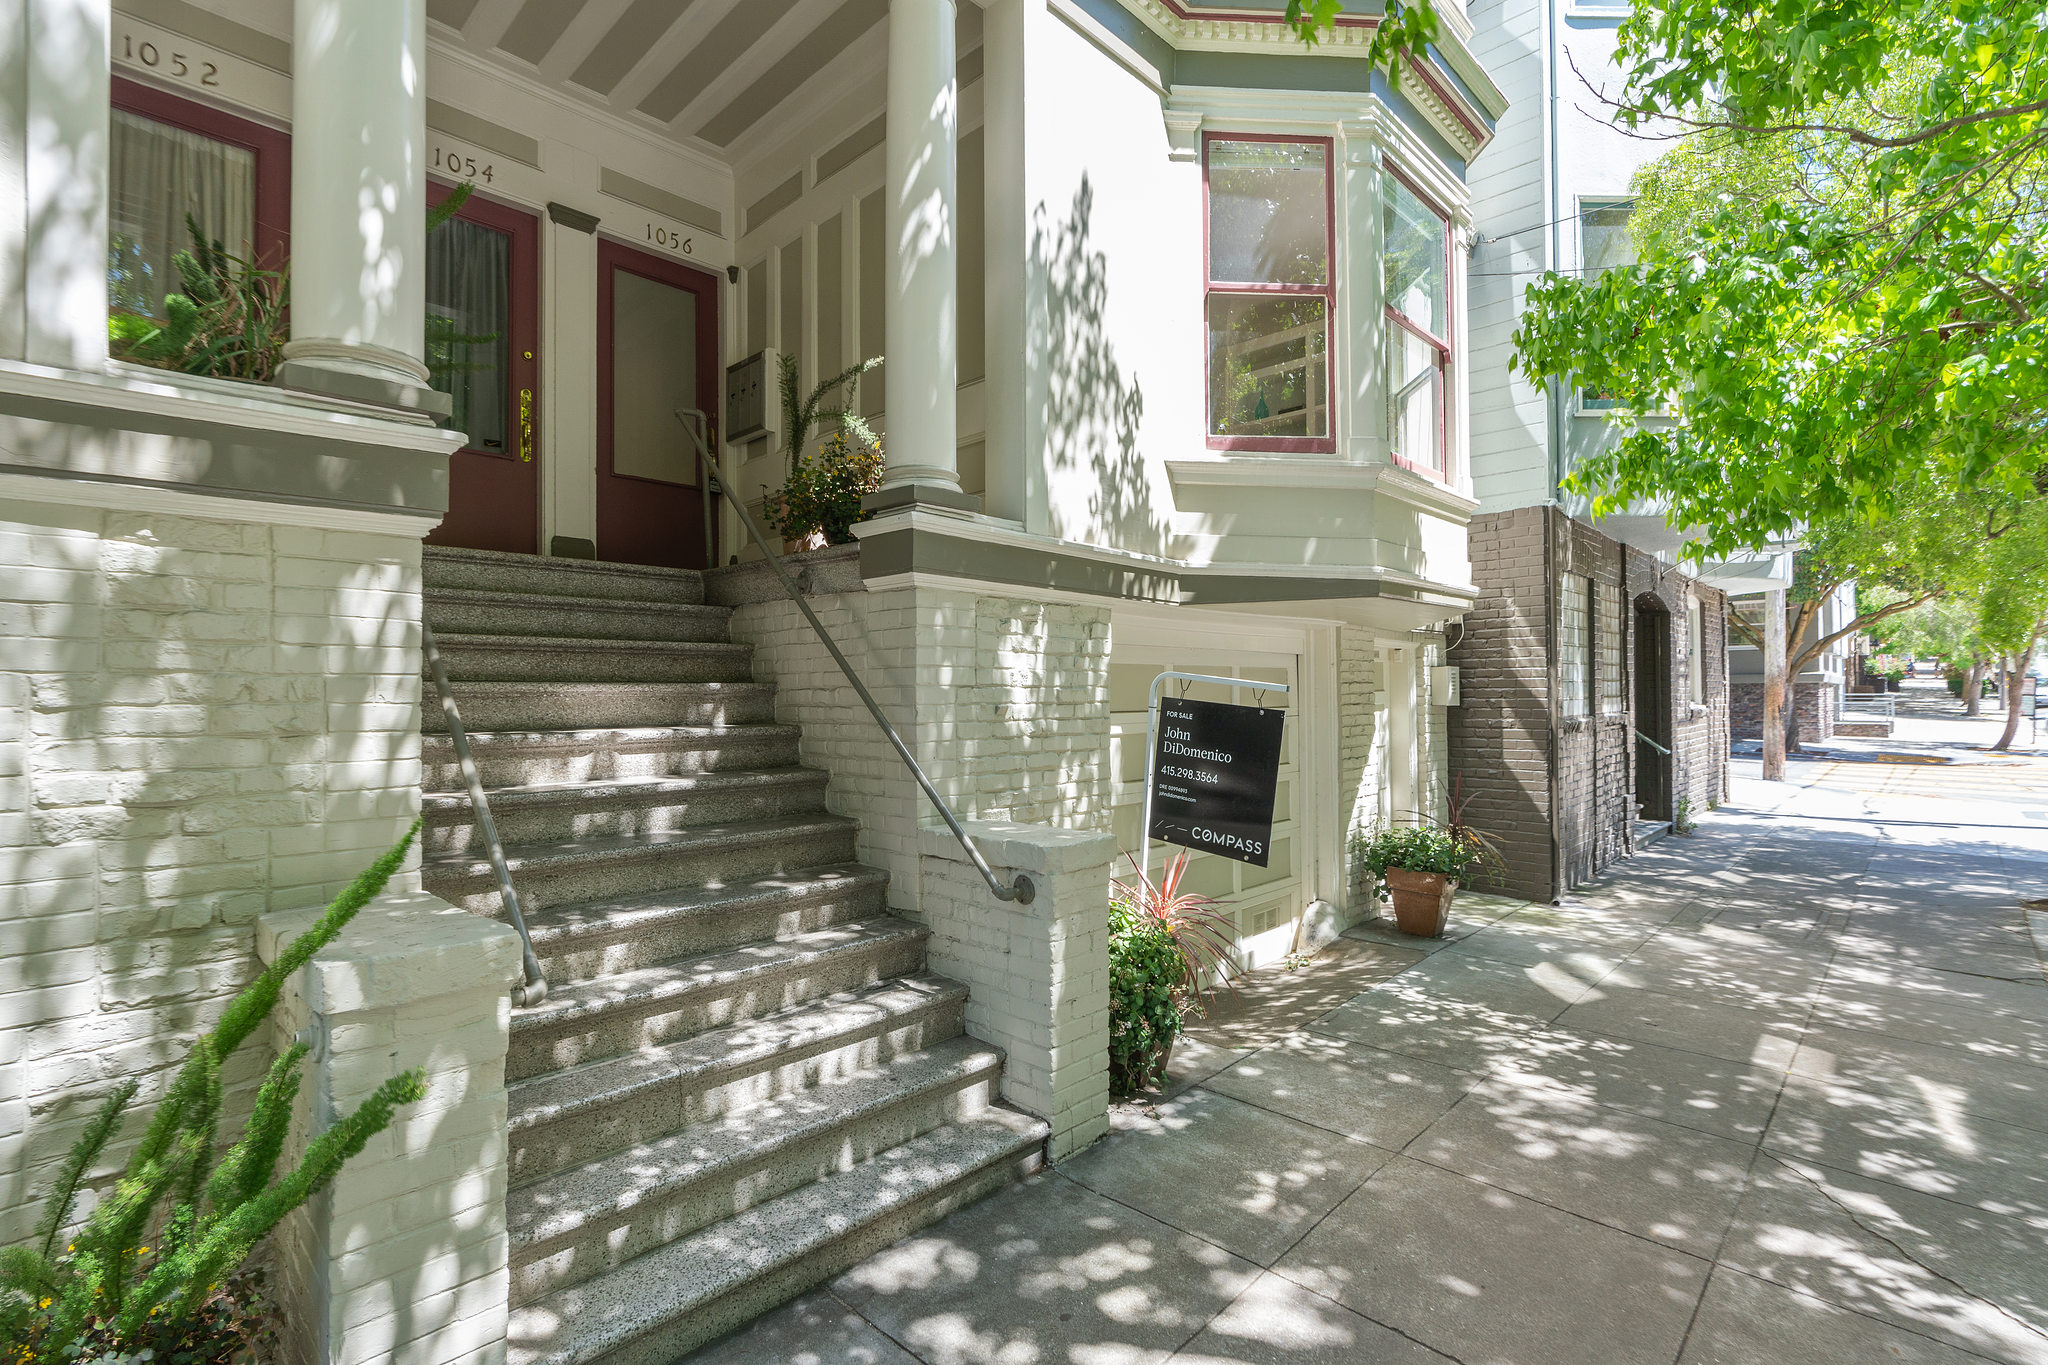 View of a San Francisco home for sale, with a sign for agent John DiDomenico